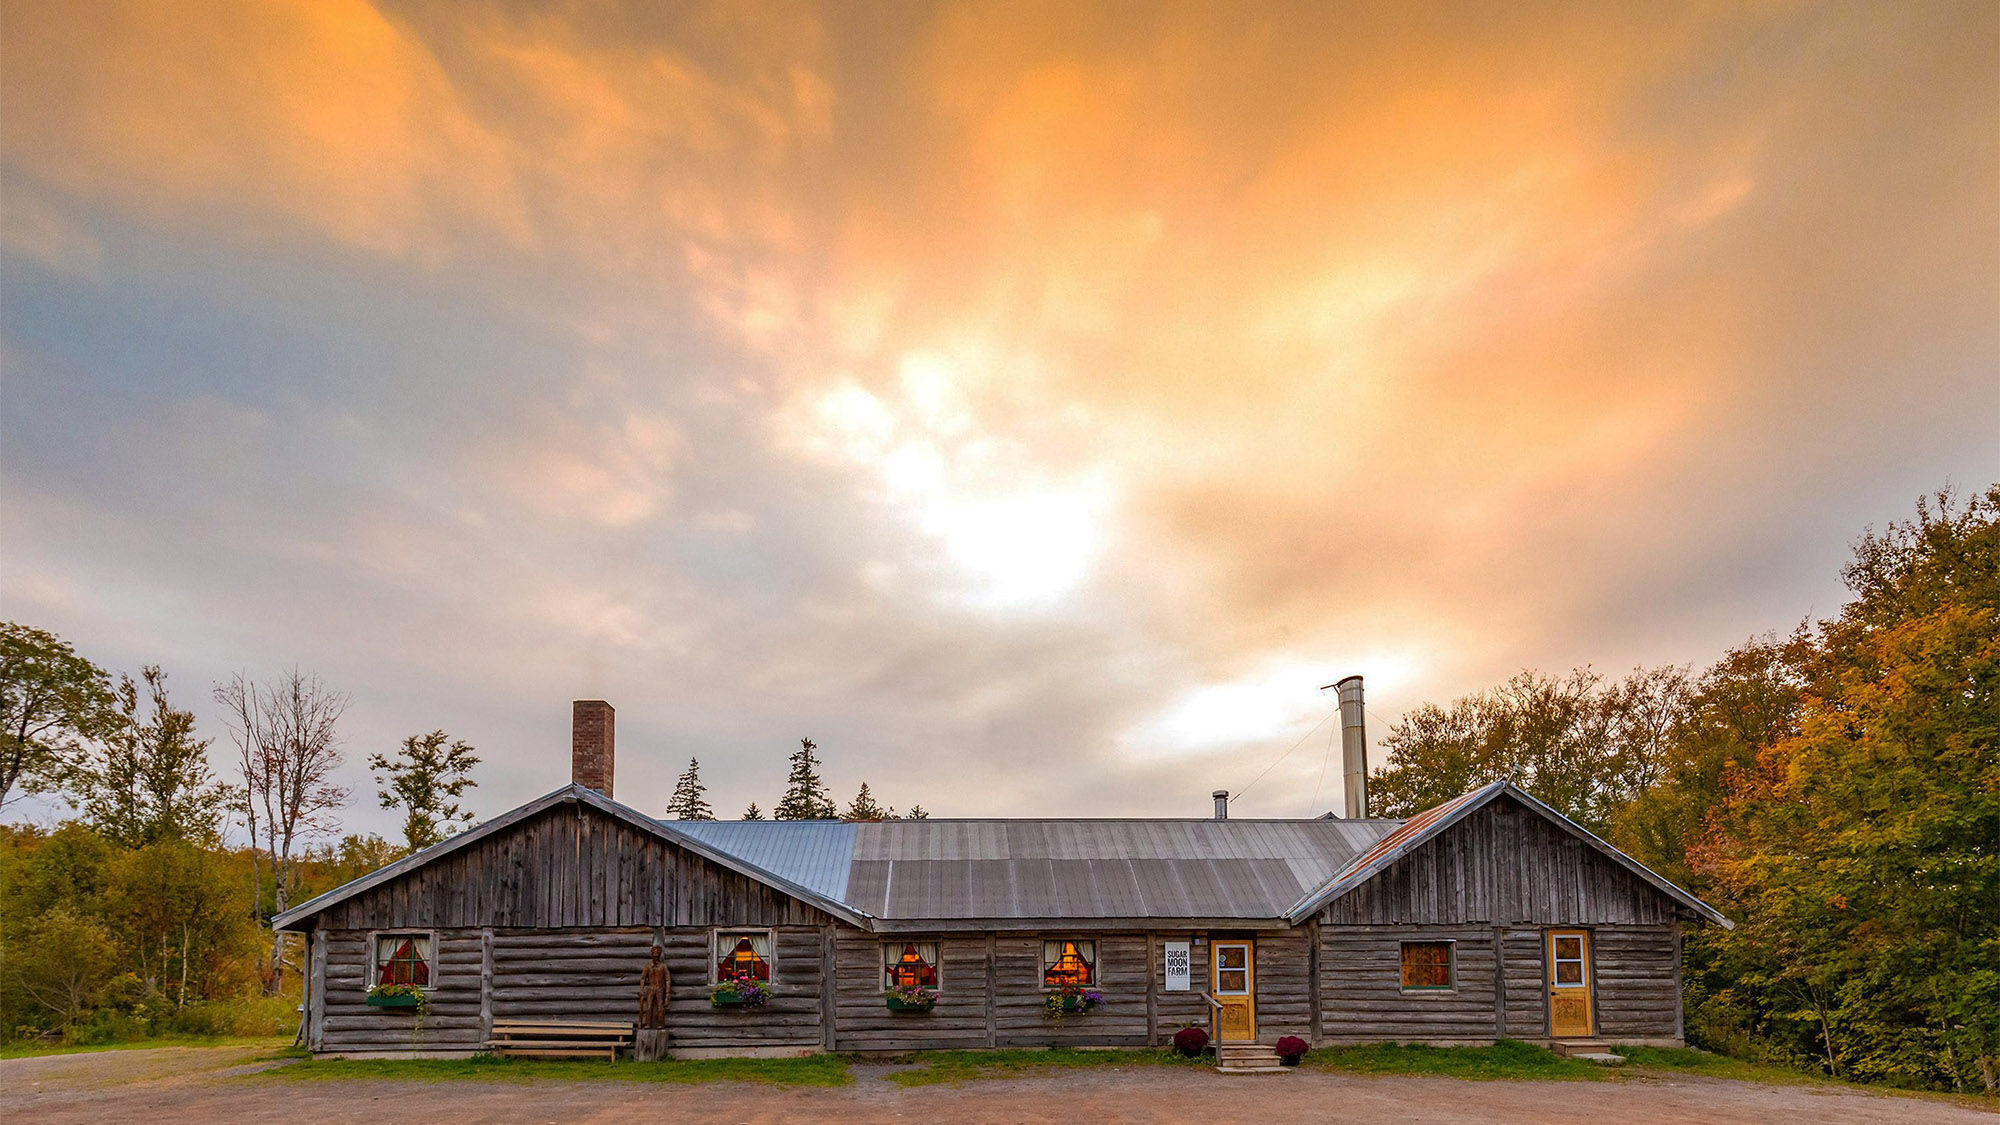 Guests will visit Sugar Moon, a maple syrup farm in Nova Scotia, during the Adventures by Disney itinerary to Nova Scotia and Prince Edward Island.